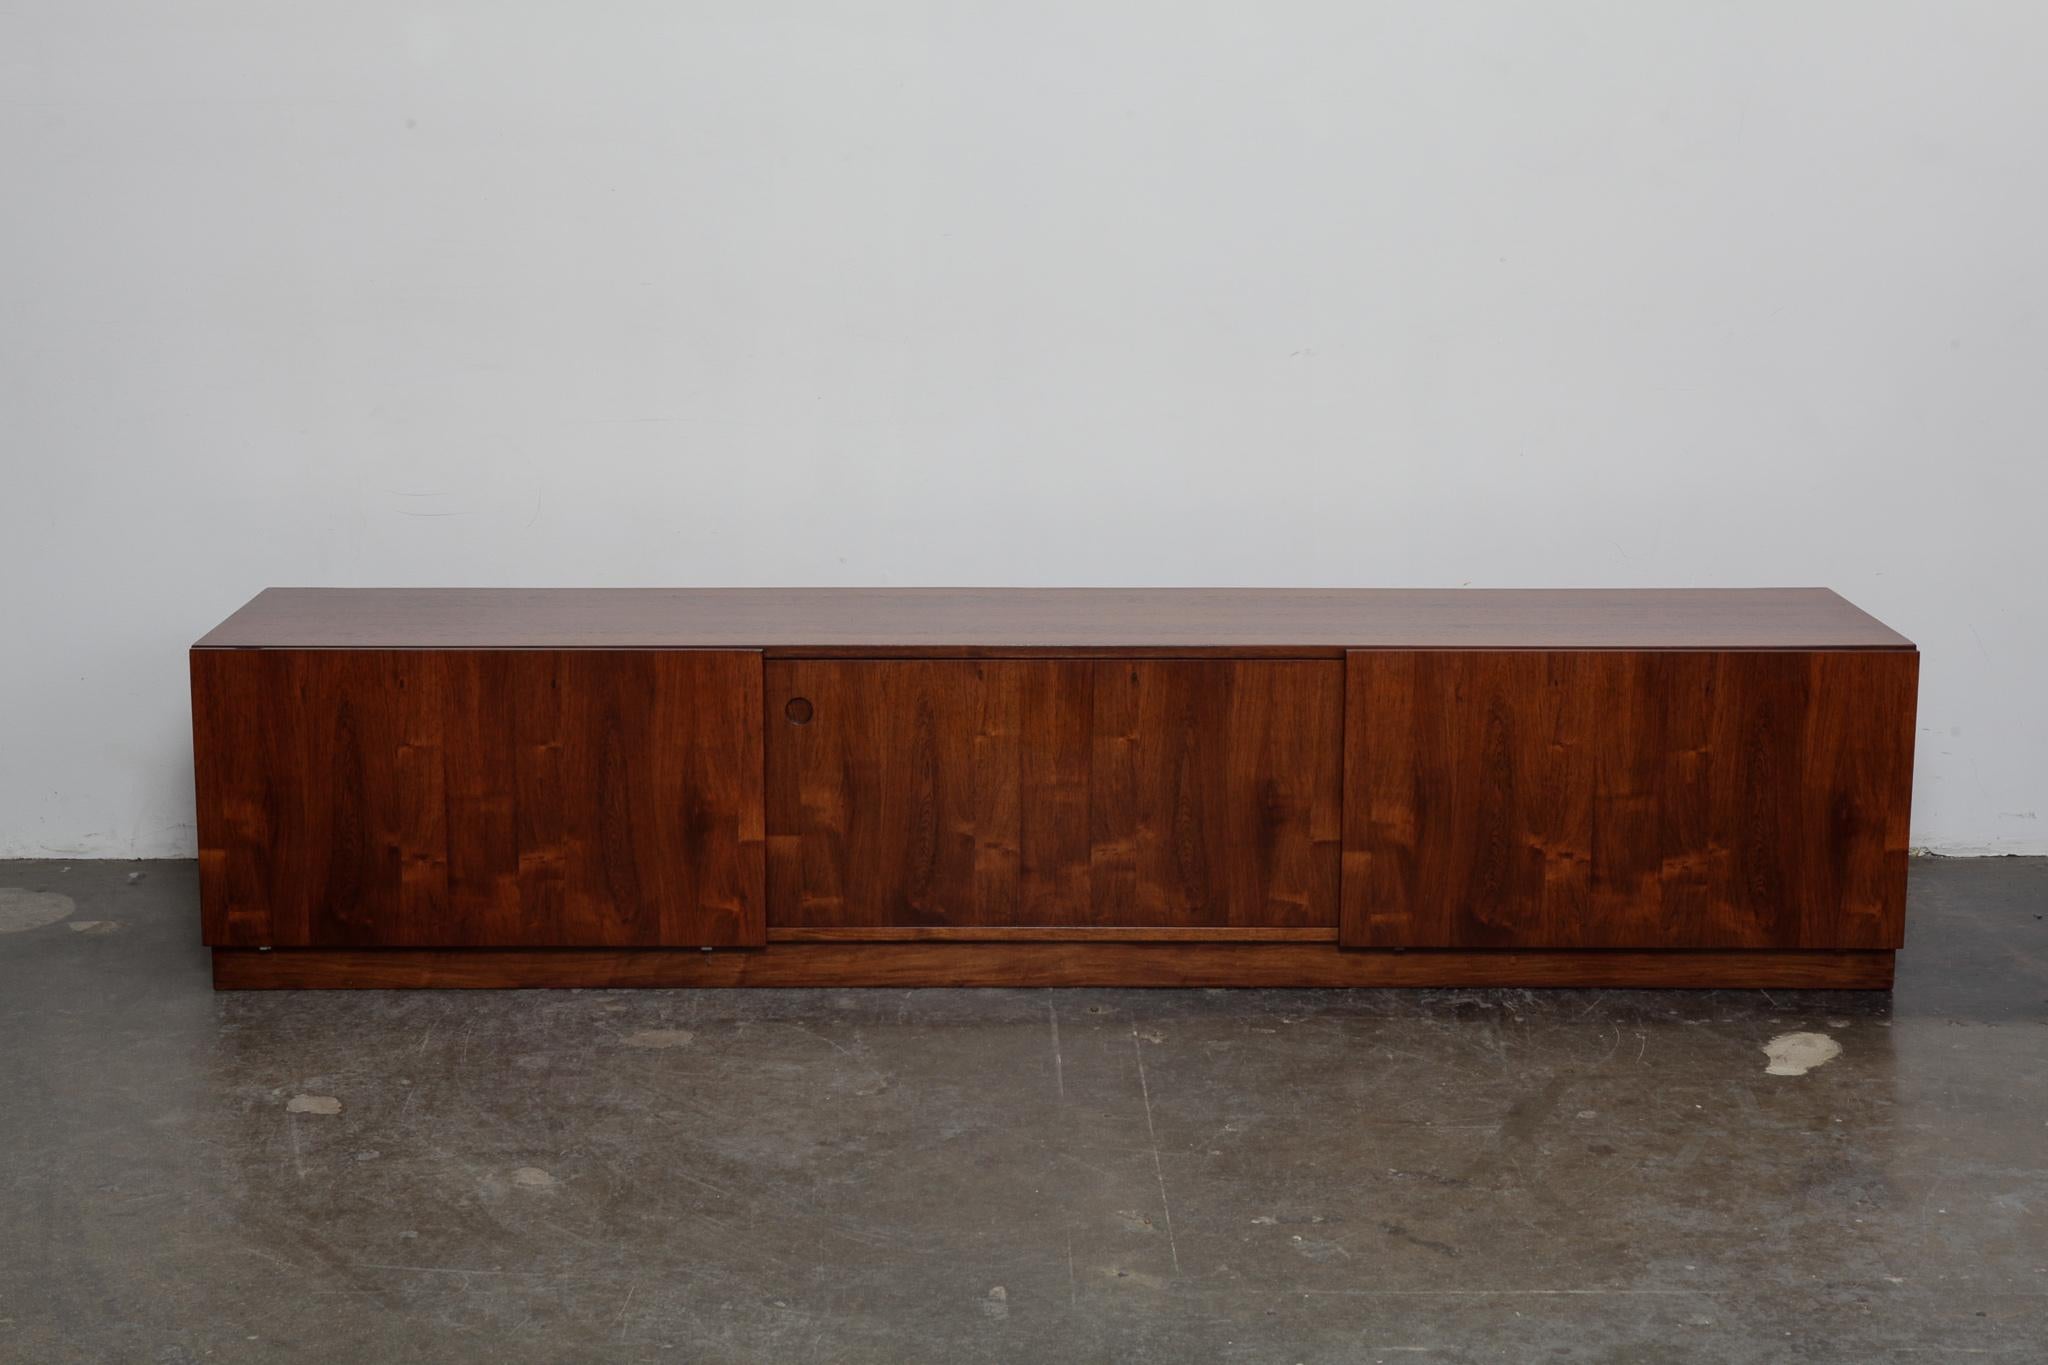 Long, very low rosewood sideboard, Danish, by Ib Kofod Larsen, produced by Faarup Mobelfabrik. It has 3 sliding doors with center drawers, sitting on a plinth base. Excellent grain throughout, newly refinished in lacquer.